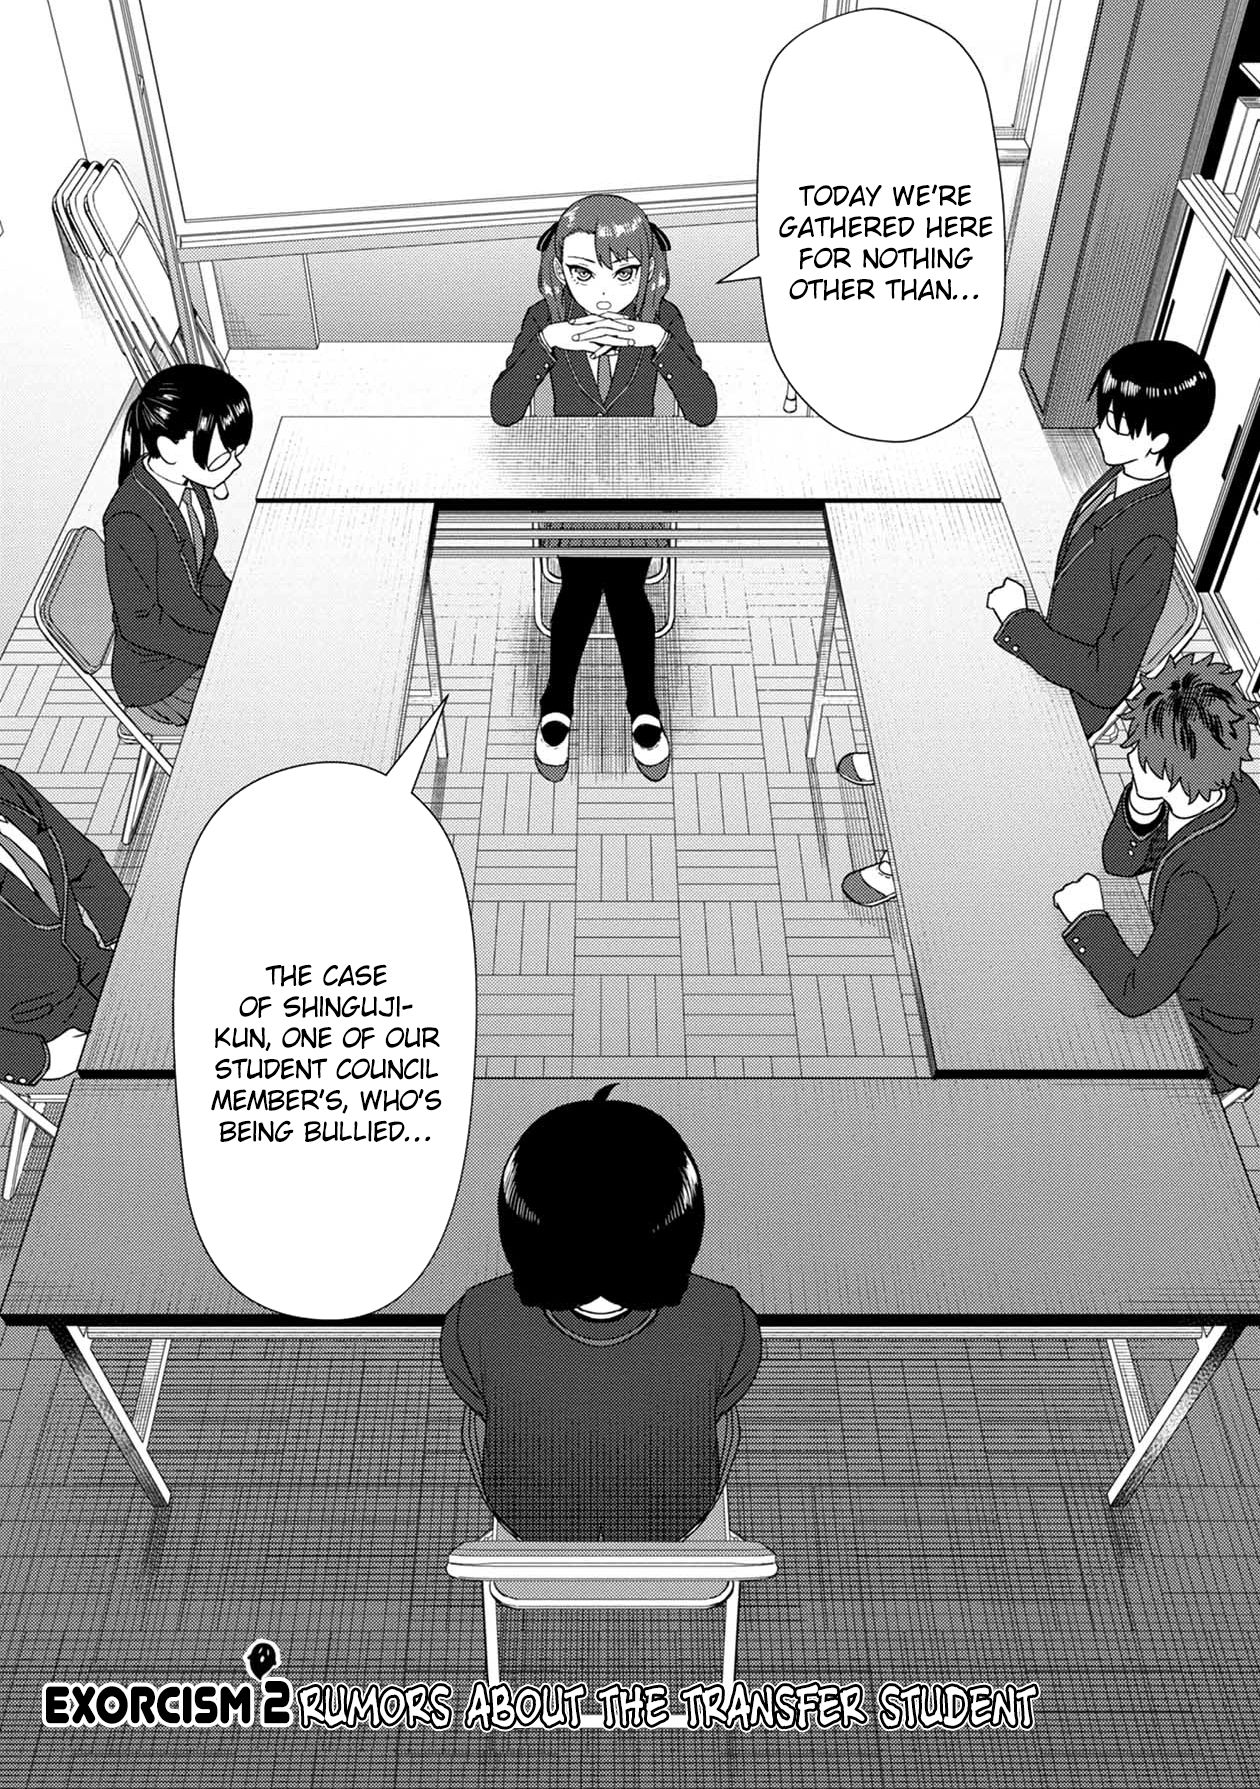 Bad Girl-Exorcist Reina Chapter 2: Exorcism #2: Rumors About The Transfer Student - Picture 1